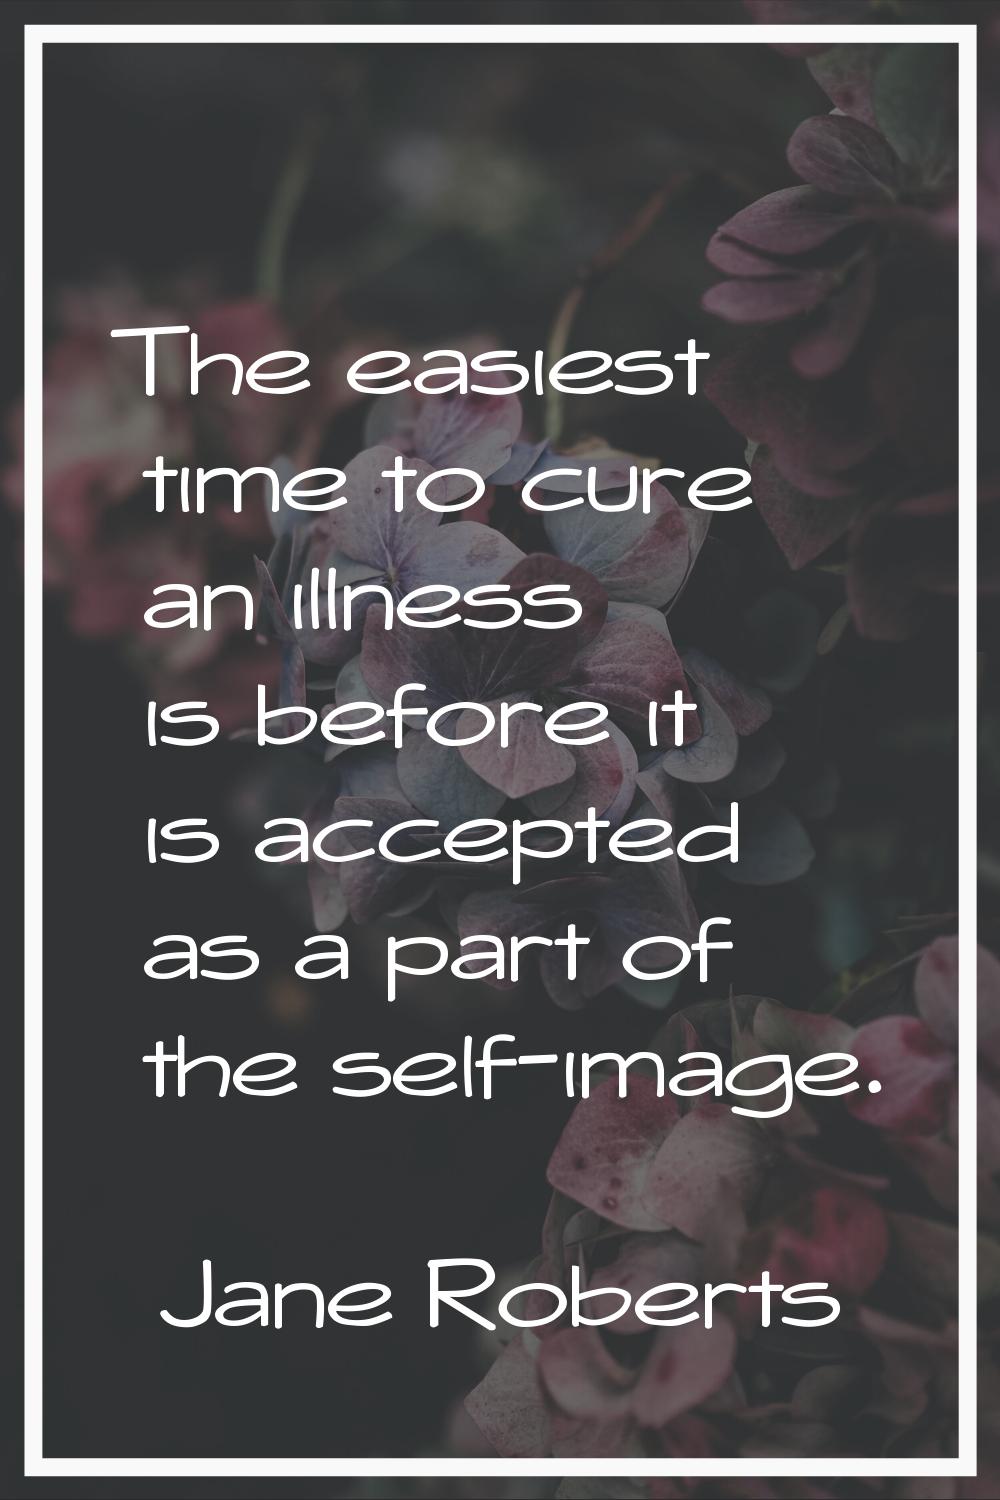 The easiest time to cure an illness is before it is accepted as a part of the self-image.